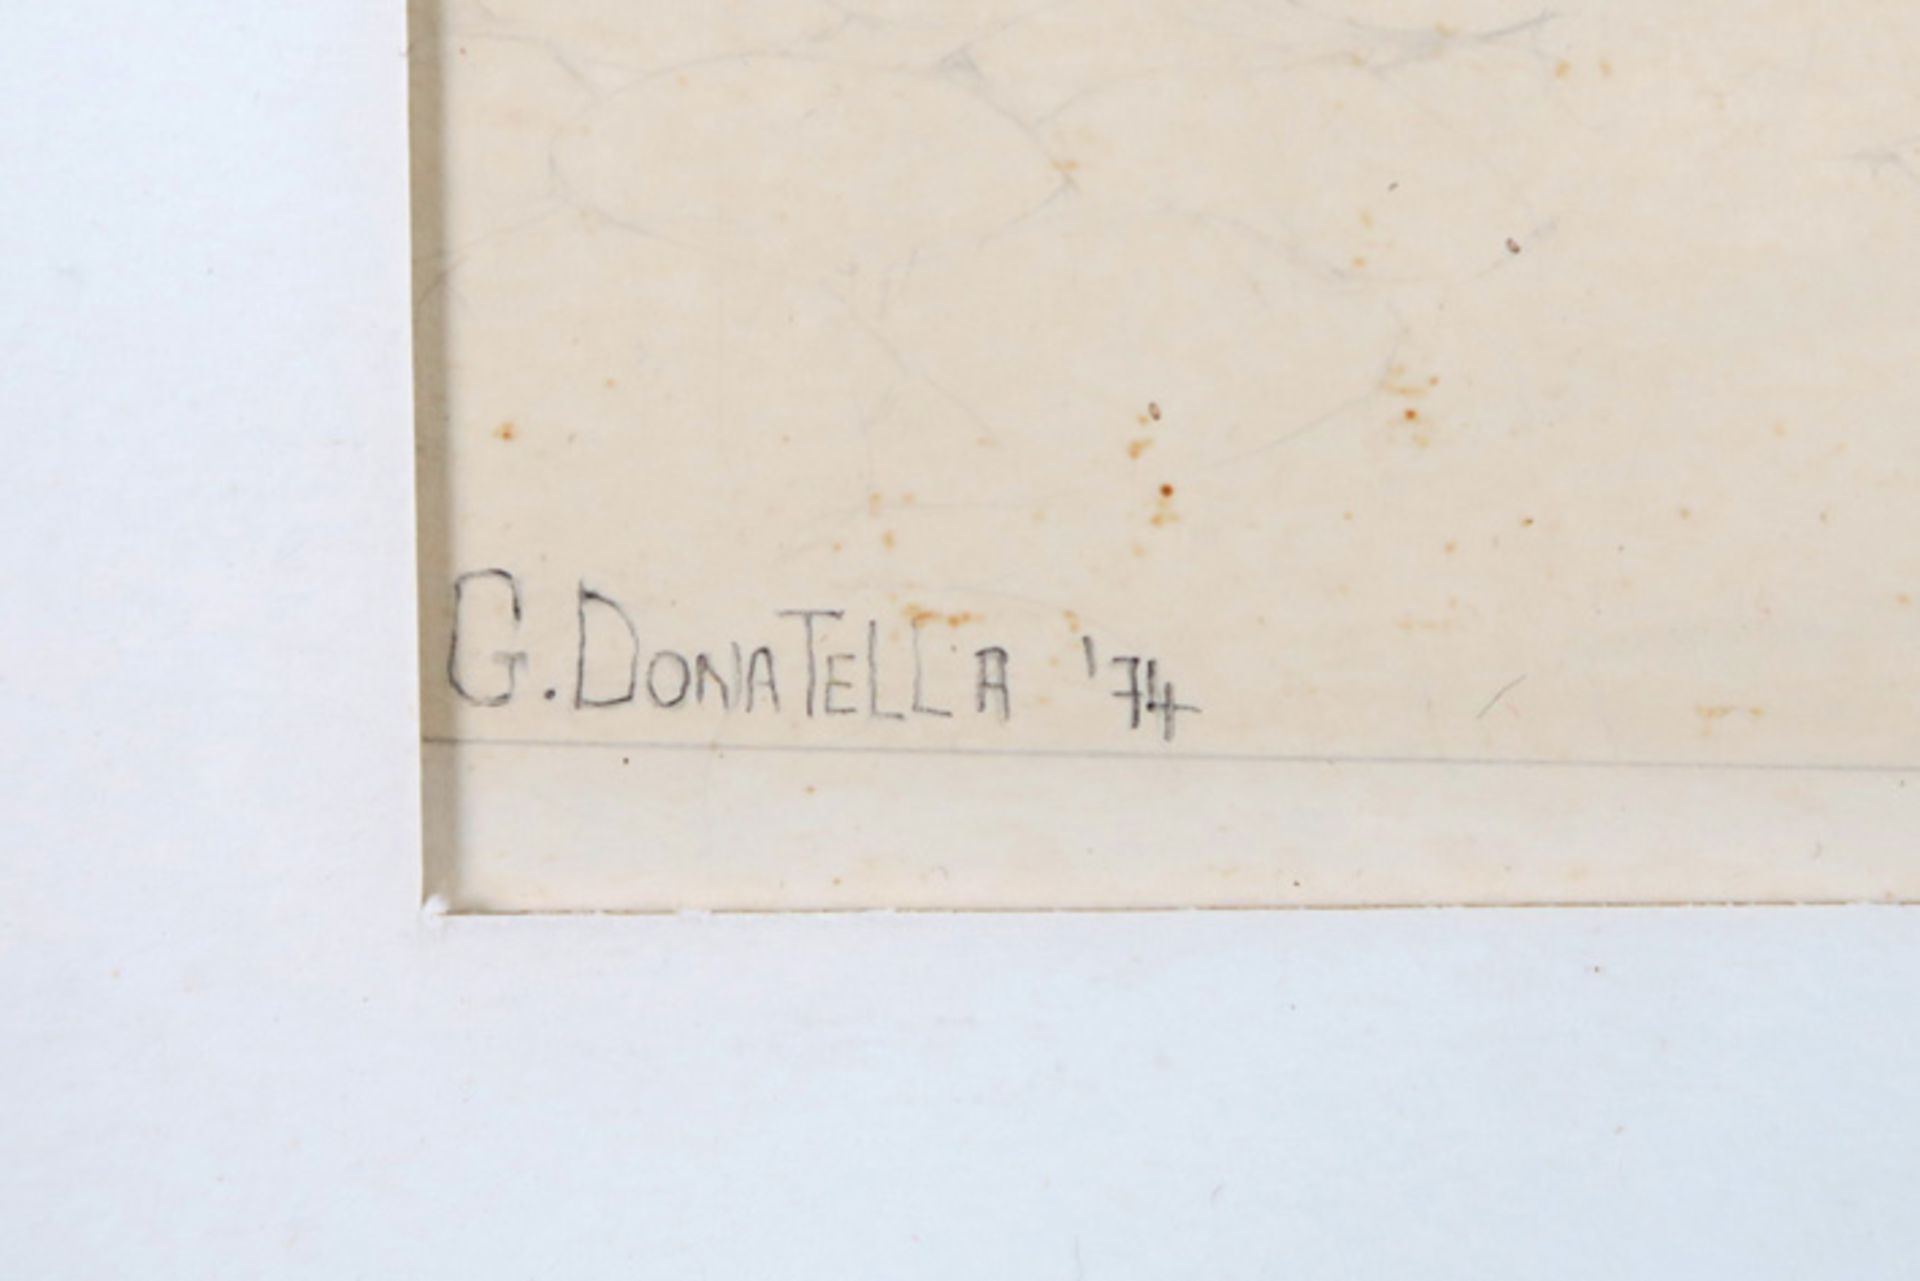 20th Cent. drawing with a surreal theme - signed G. Donatella||DONATELLA G. (20° - 21° EEUW) ( - Image 2 of 3